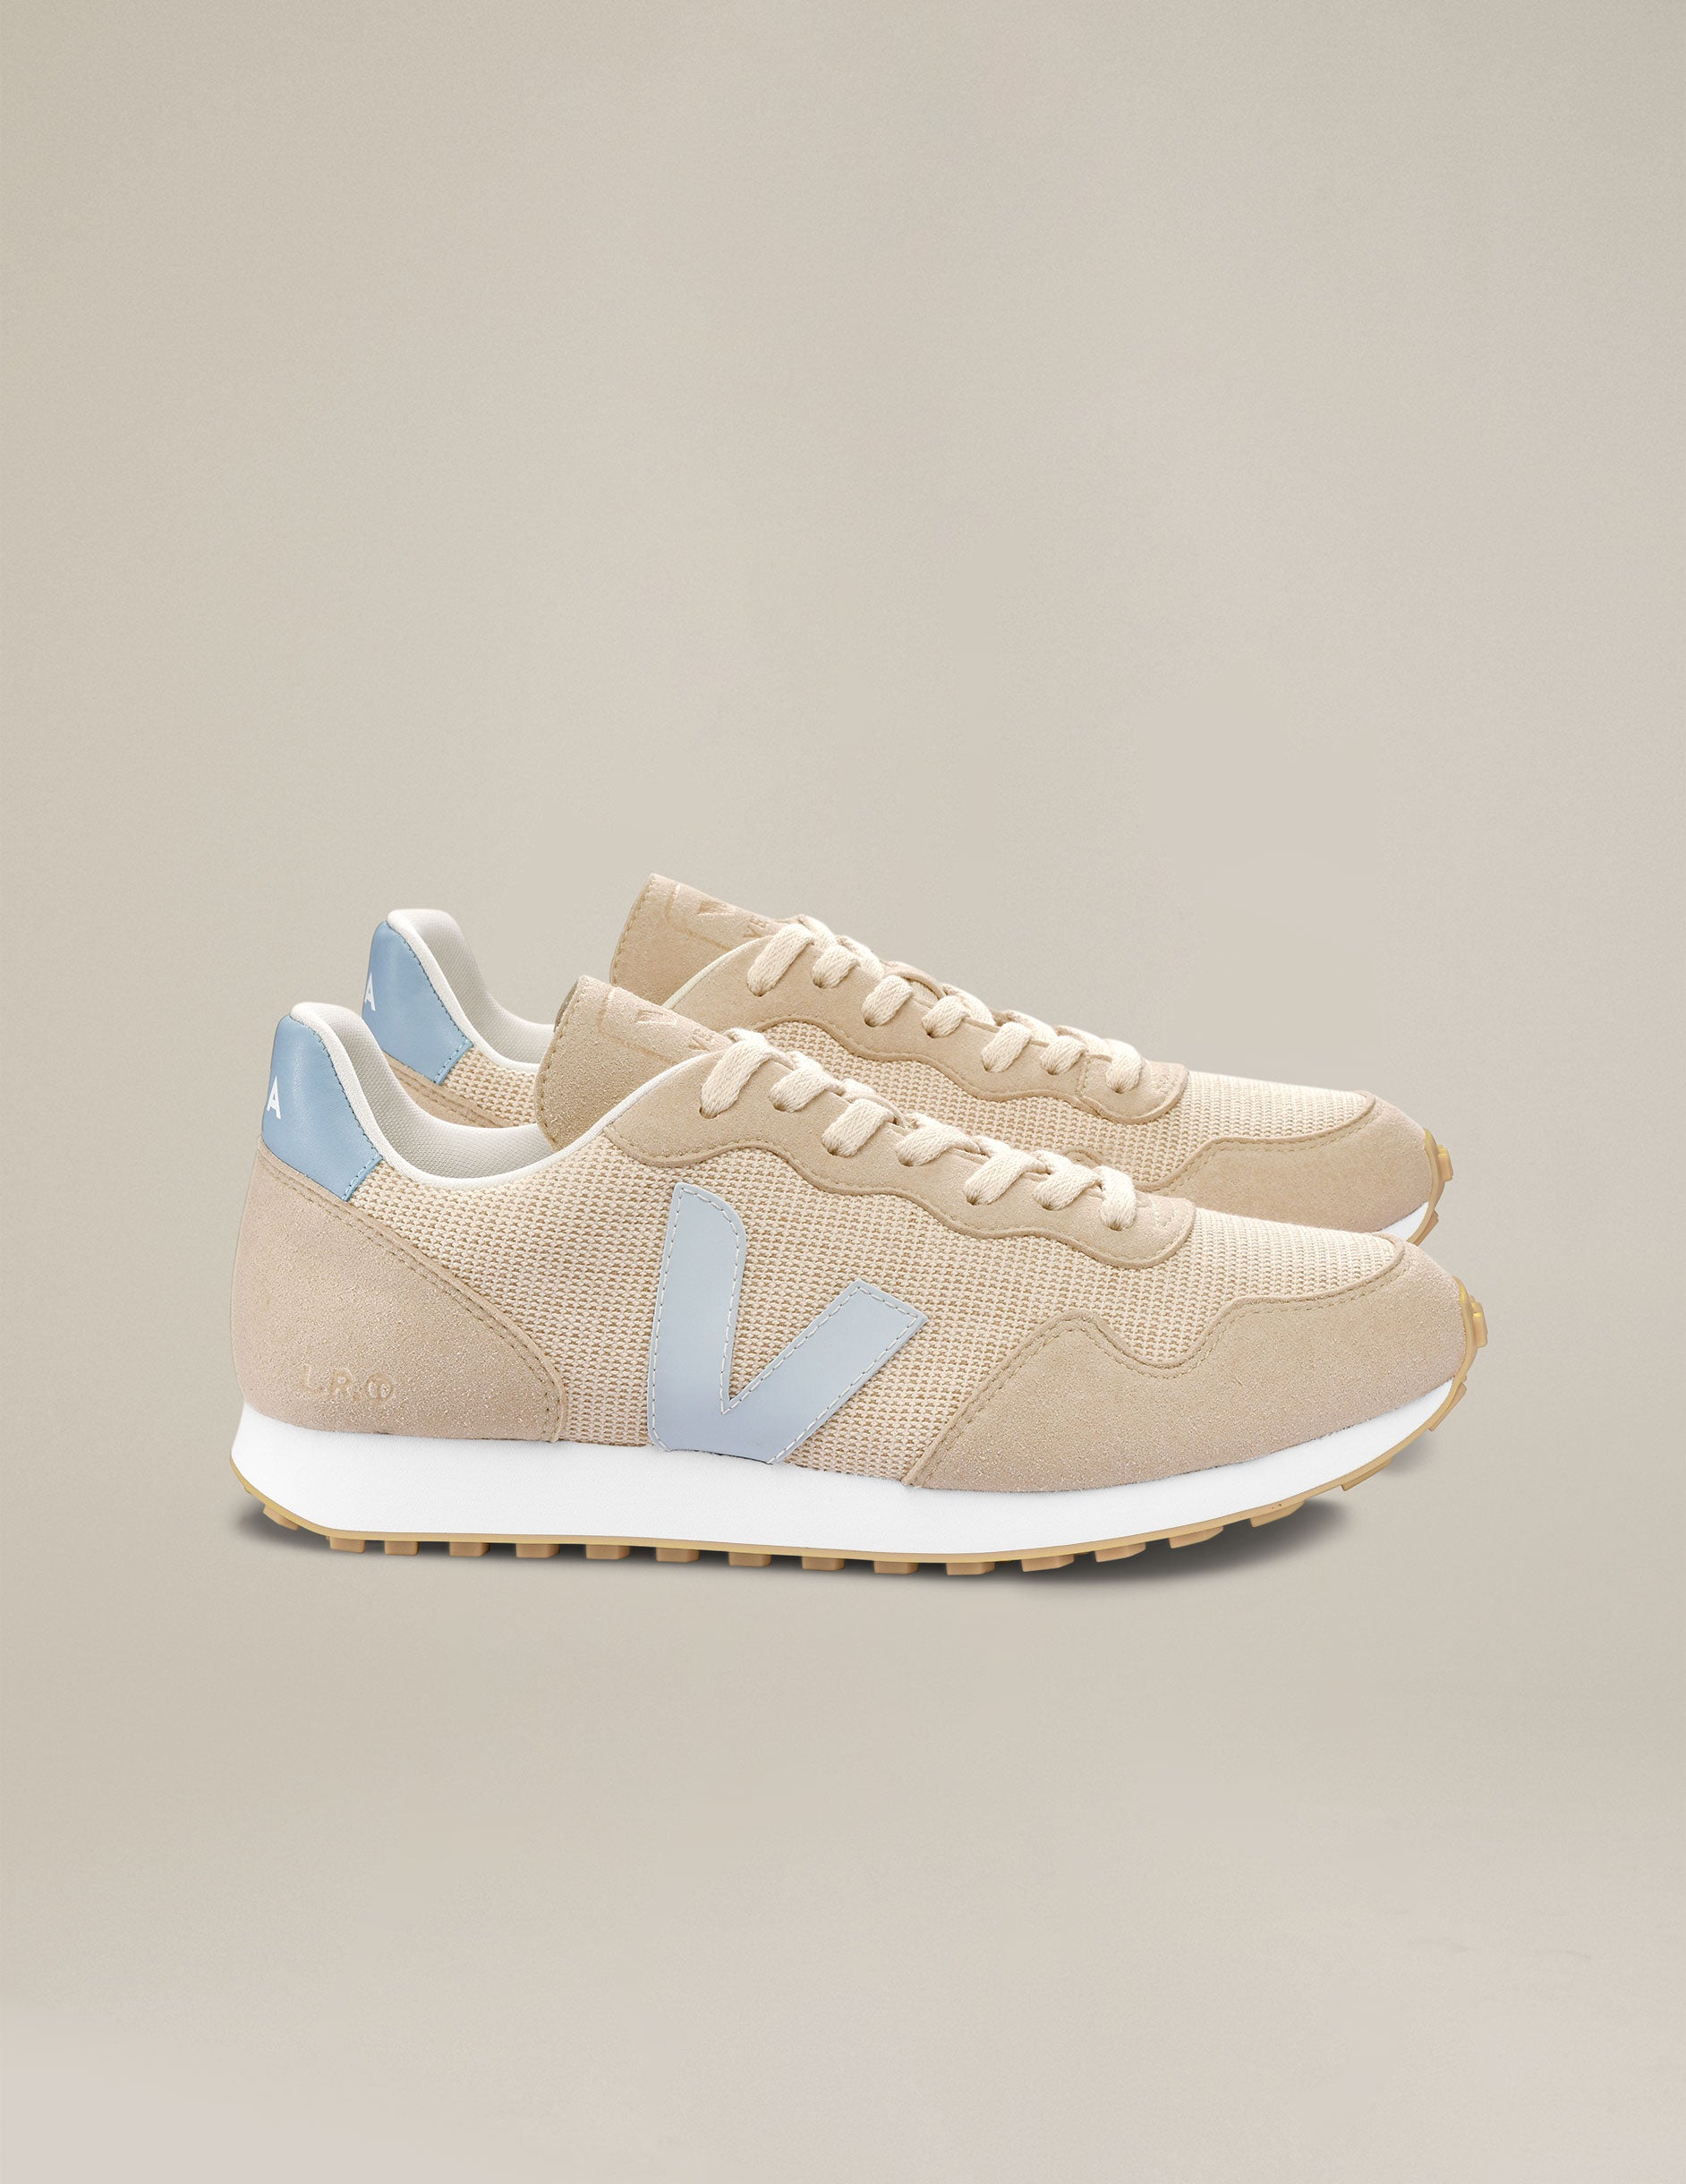 cream and blue lace up Veja SDU sneakers. made in Brazil.